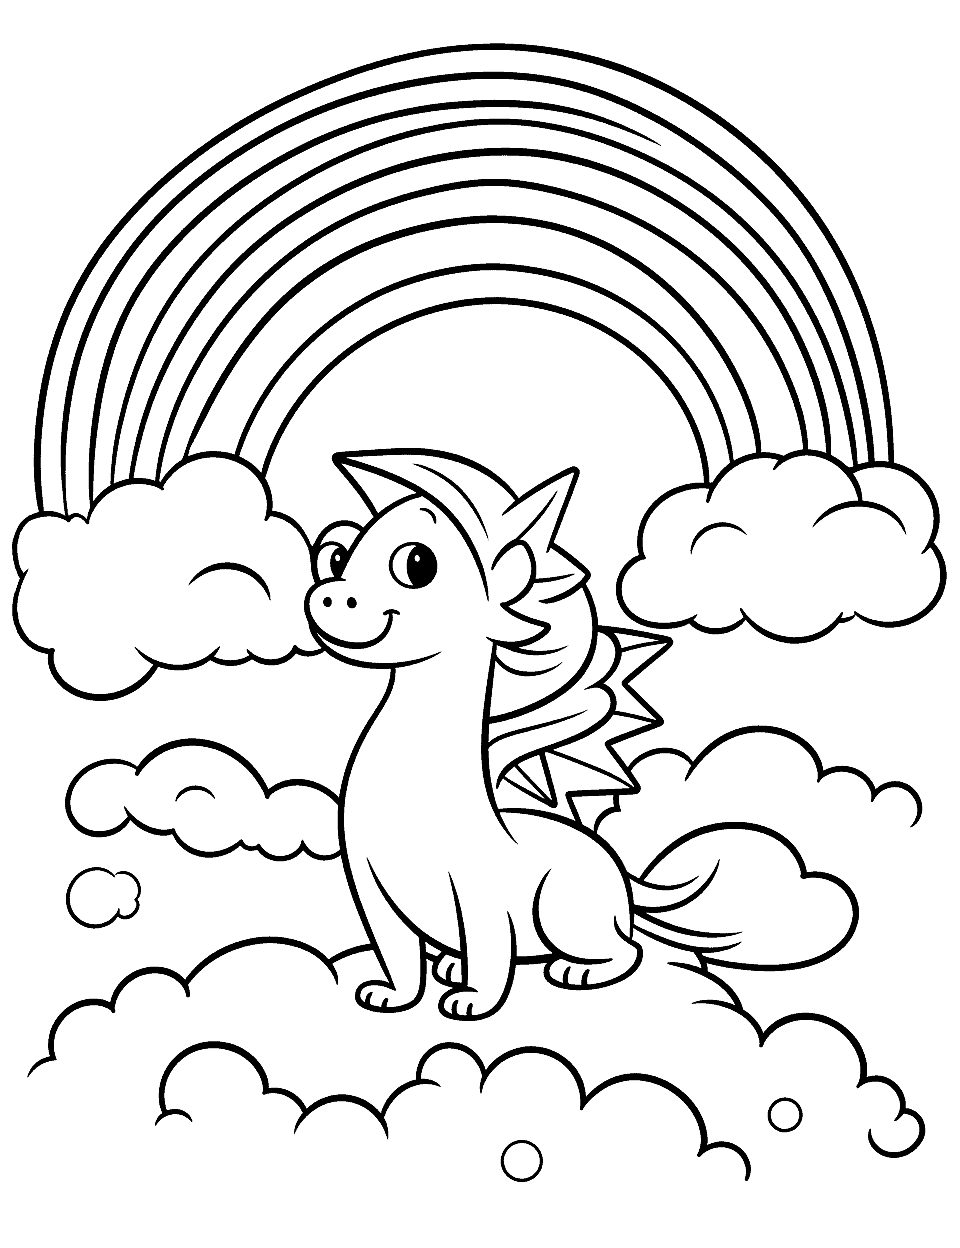 Cute Dragon and Rainbow Coloring Page - A friendly dragon flying over a magical land with a rainbow in the sky.